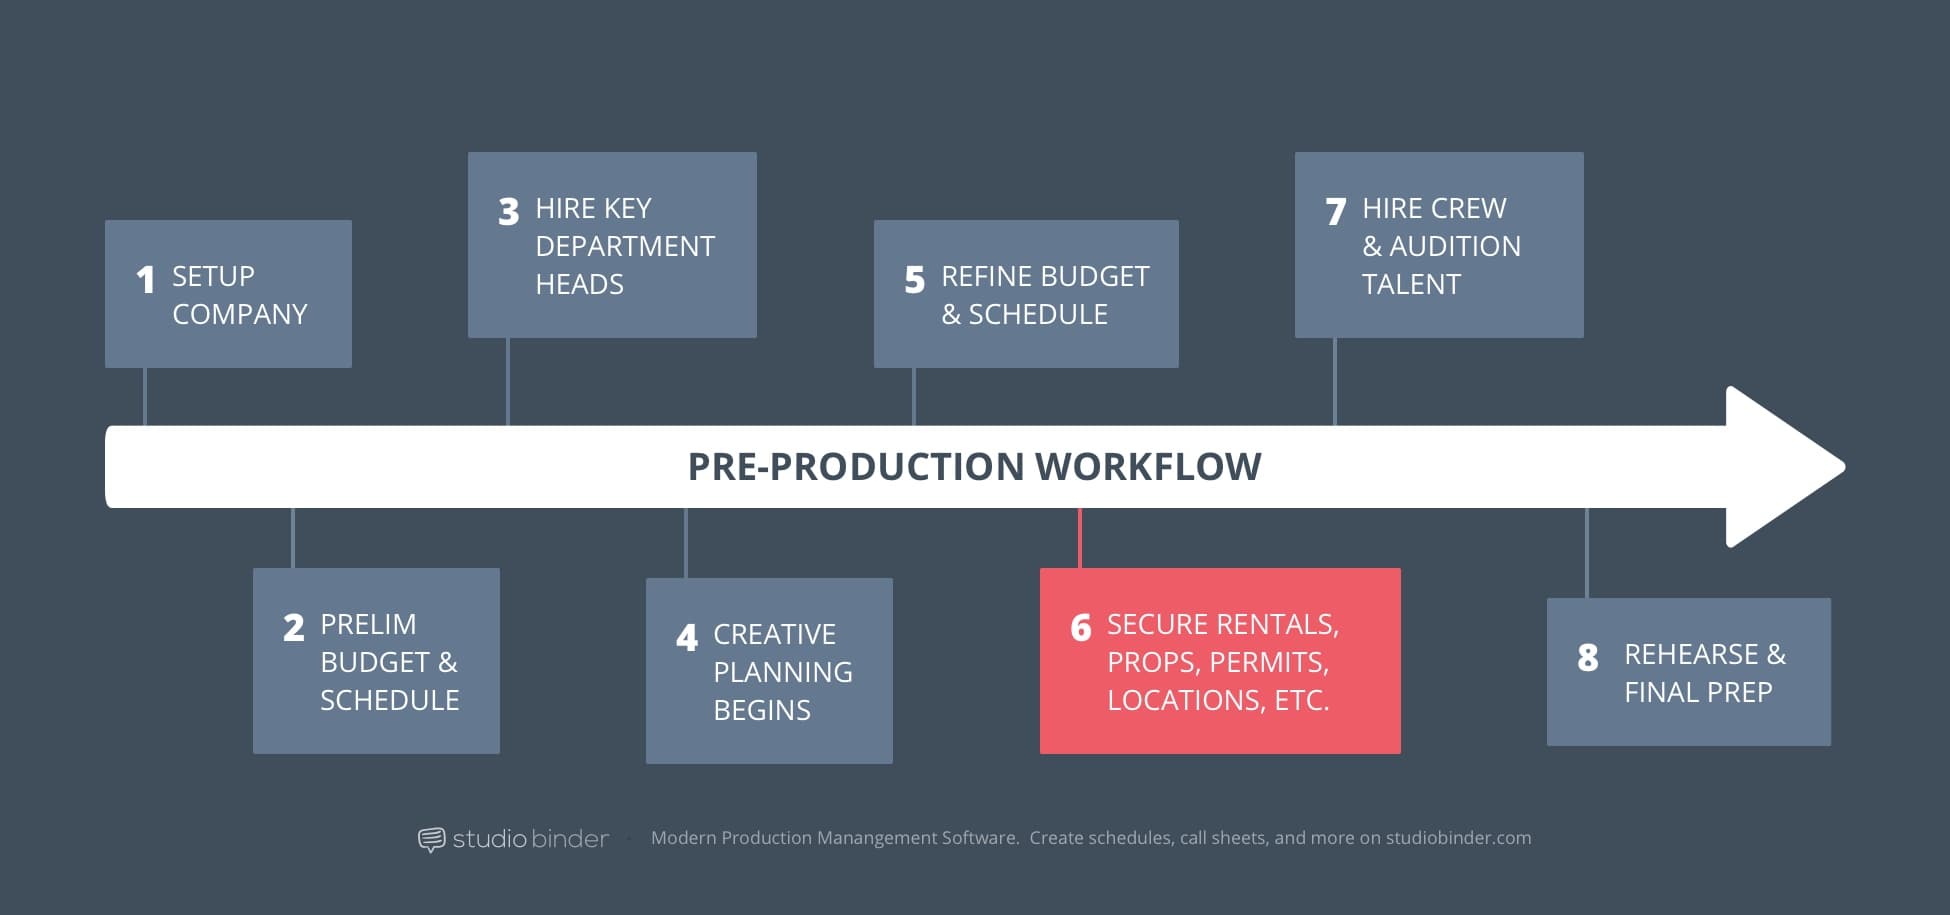 6 - StudioBinder Pre-Production Workflow - Secure Locations